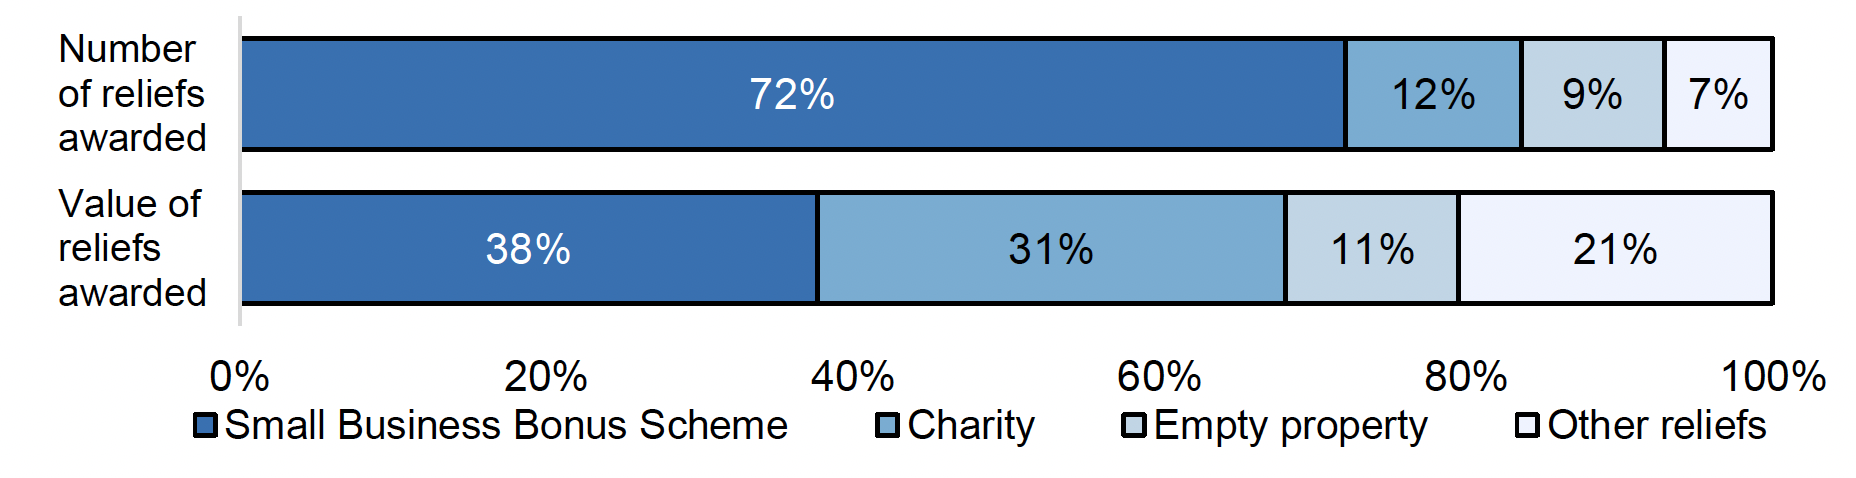 Stacked bar chart showing the proportion of the number of reliefs awarded, and of the total value of reliefs awarded, accounted for by SBBS, Charity, and Empty Property relief. Source data is available in Table 1. 